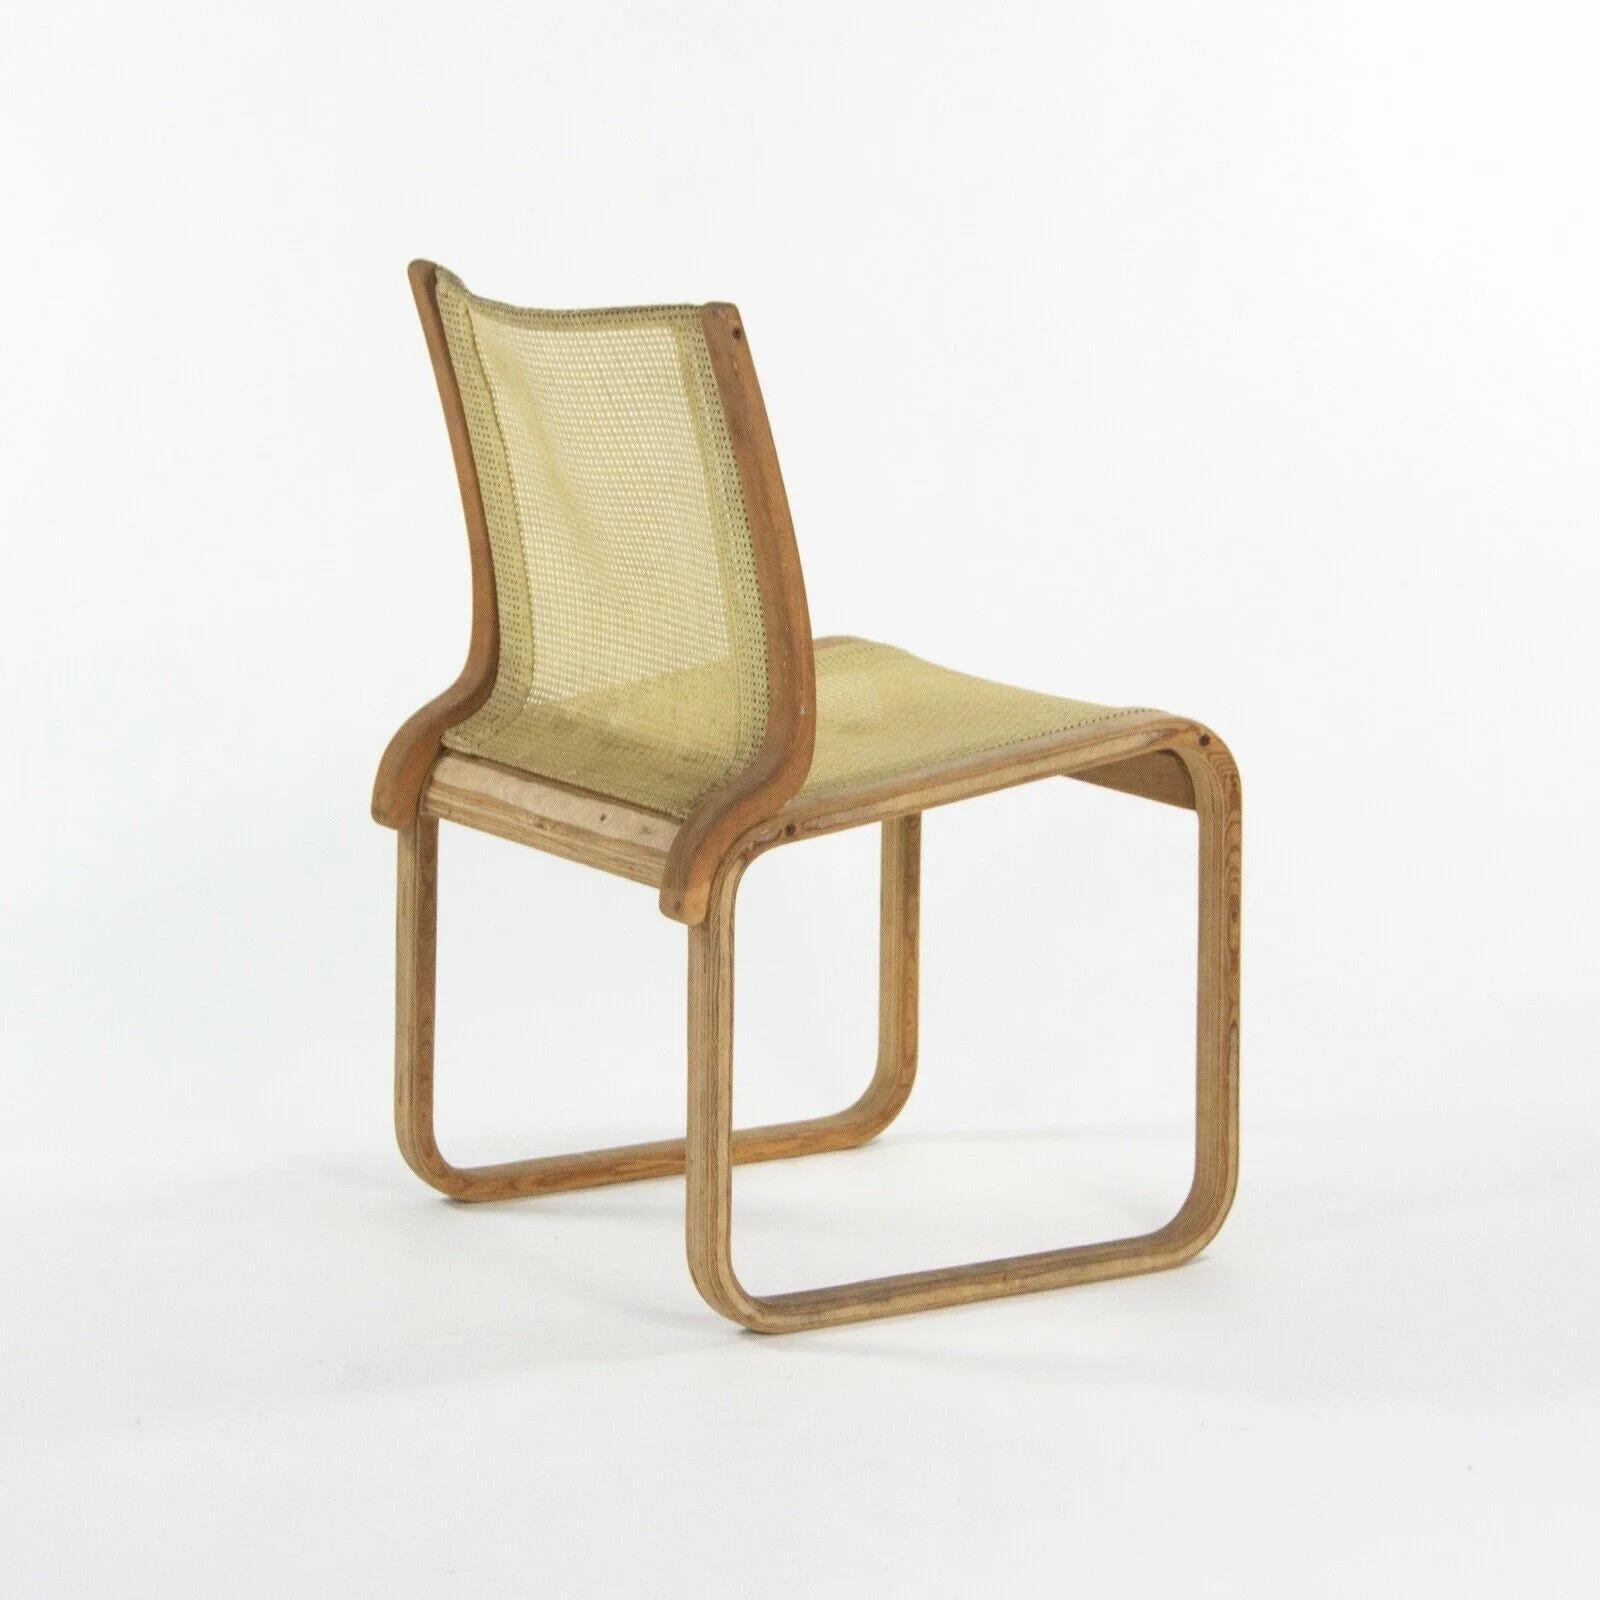 1985 Prototype Richard Schultz Wooden Outdoor Collection Dining Chair In Good Condition For Sale In Philadelphia, PA